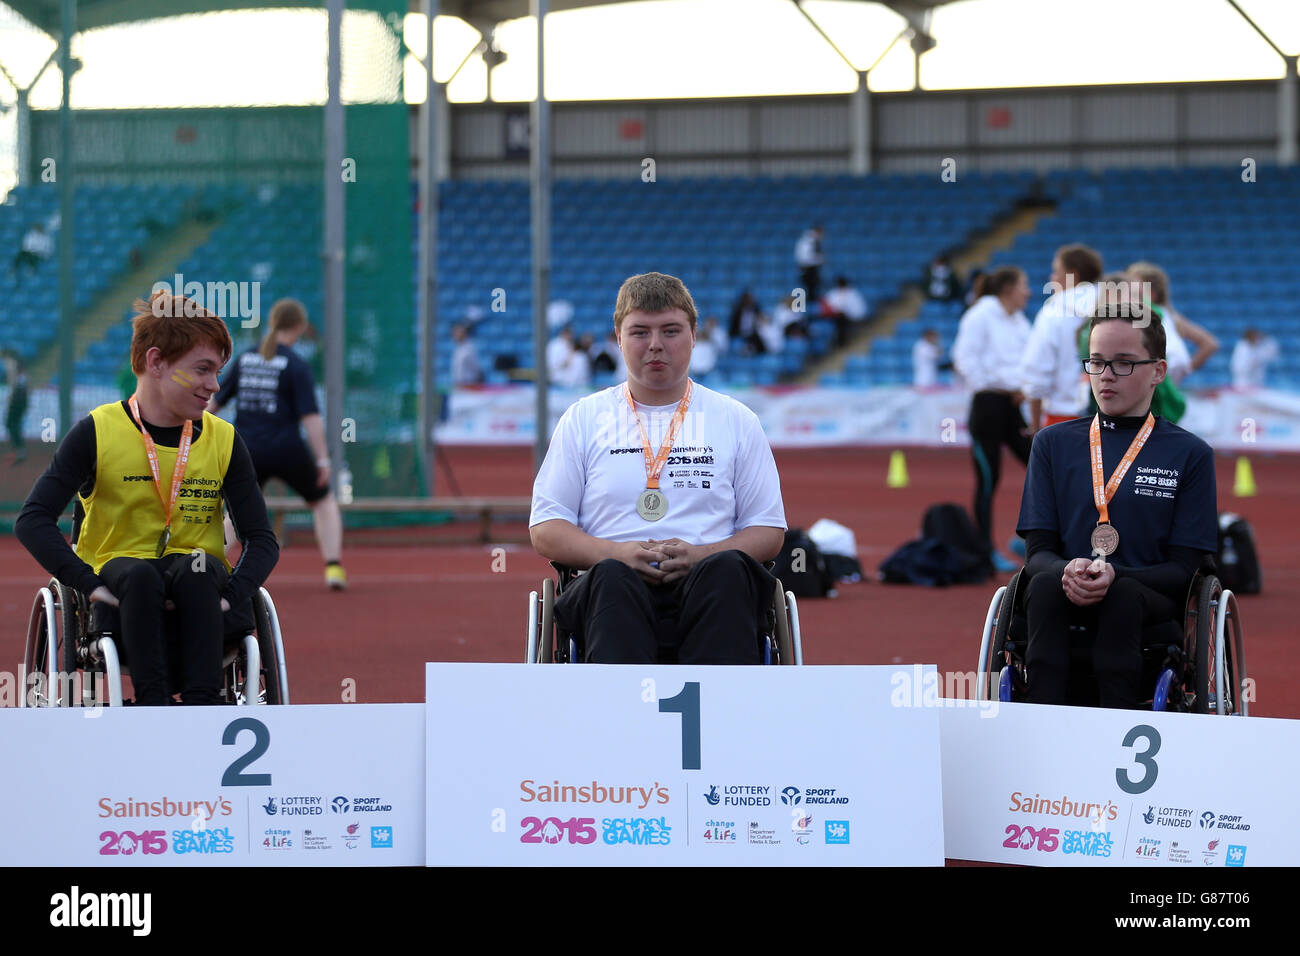 (l-r) England South West's Jaime Edwards, England South East's Joe Brazier and Scotland's Luke Deighan receive their boys 800 metre wheelchair medals during the medal ceremony at the Sainsbury's 2015 School Games at the Manchester Regional Arena. Stock Photo